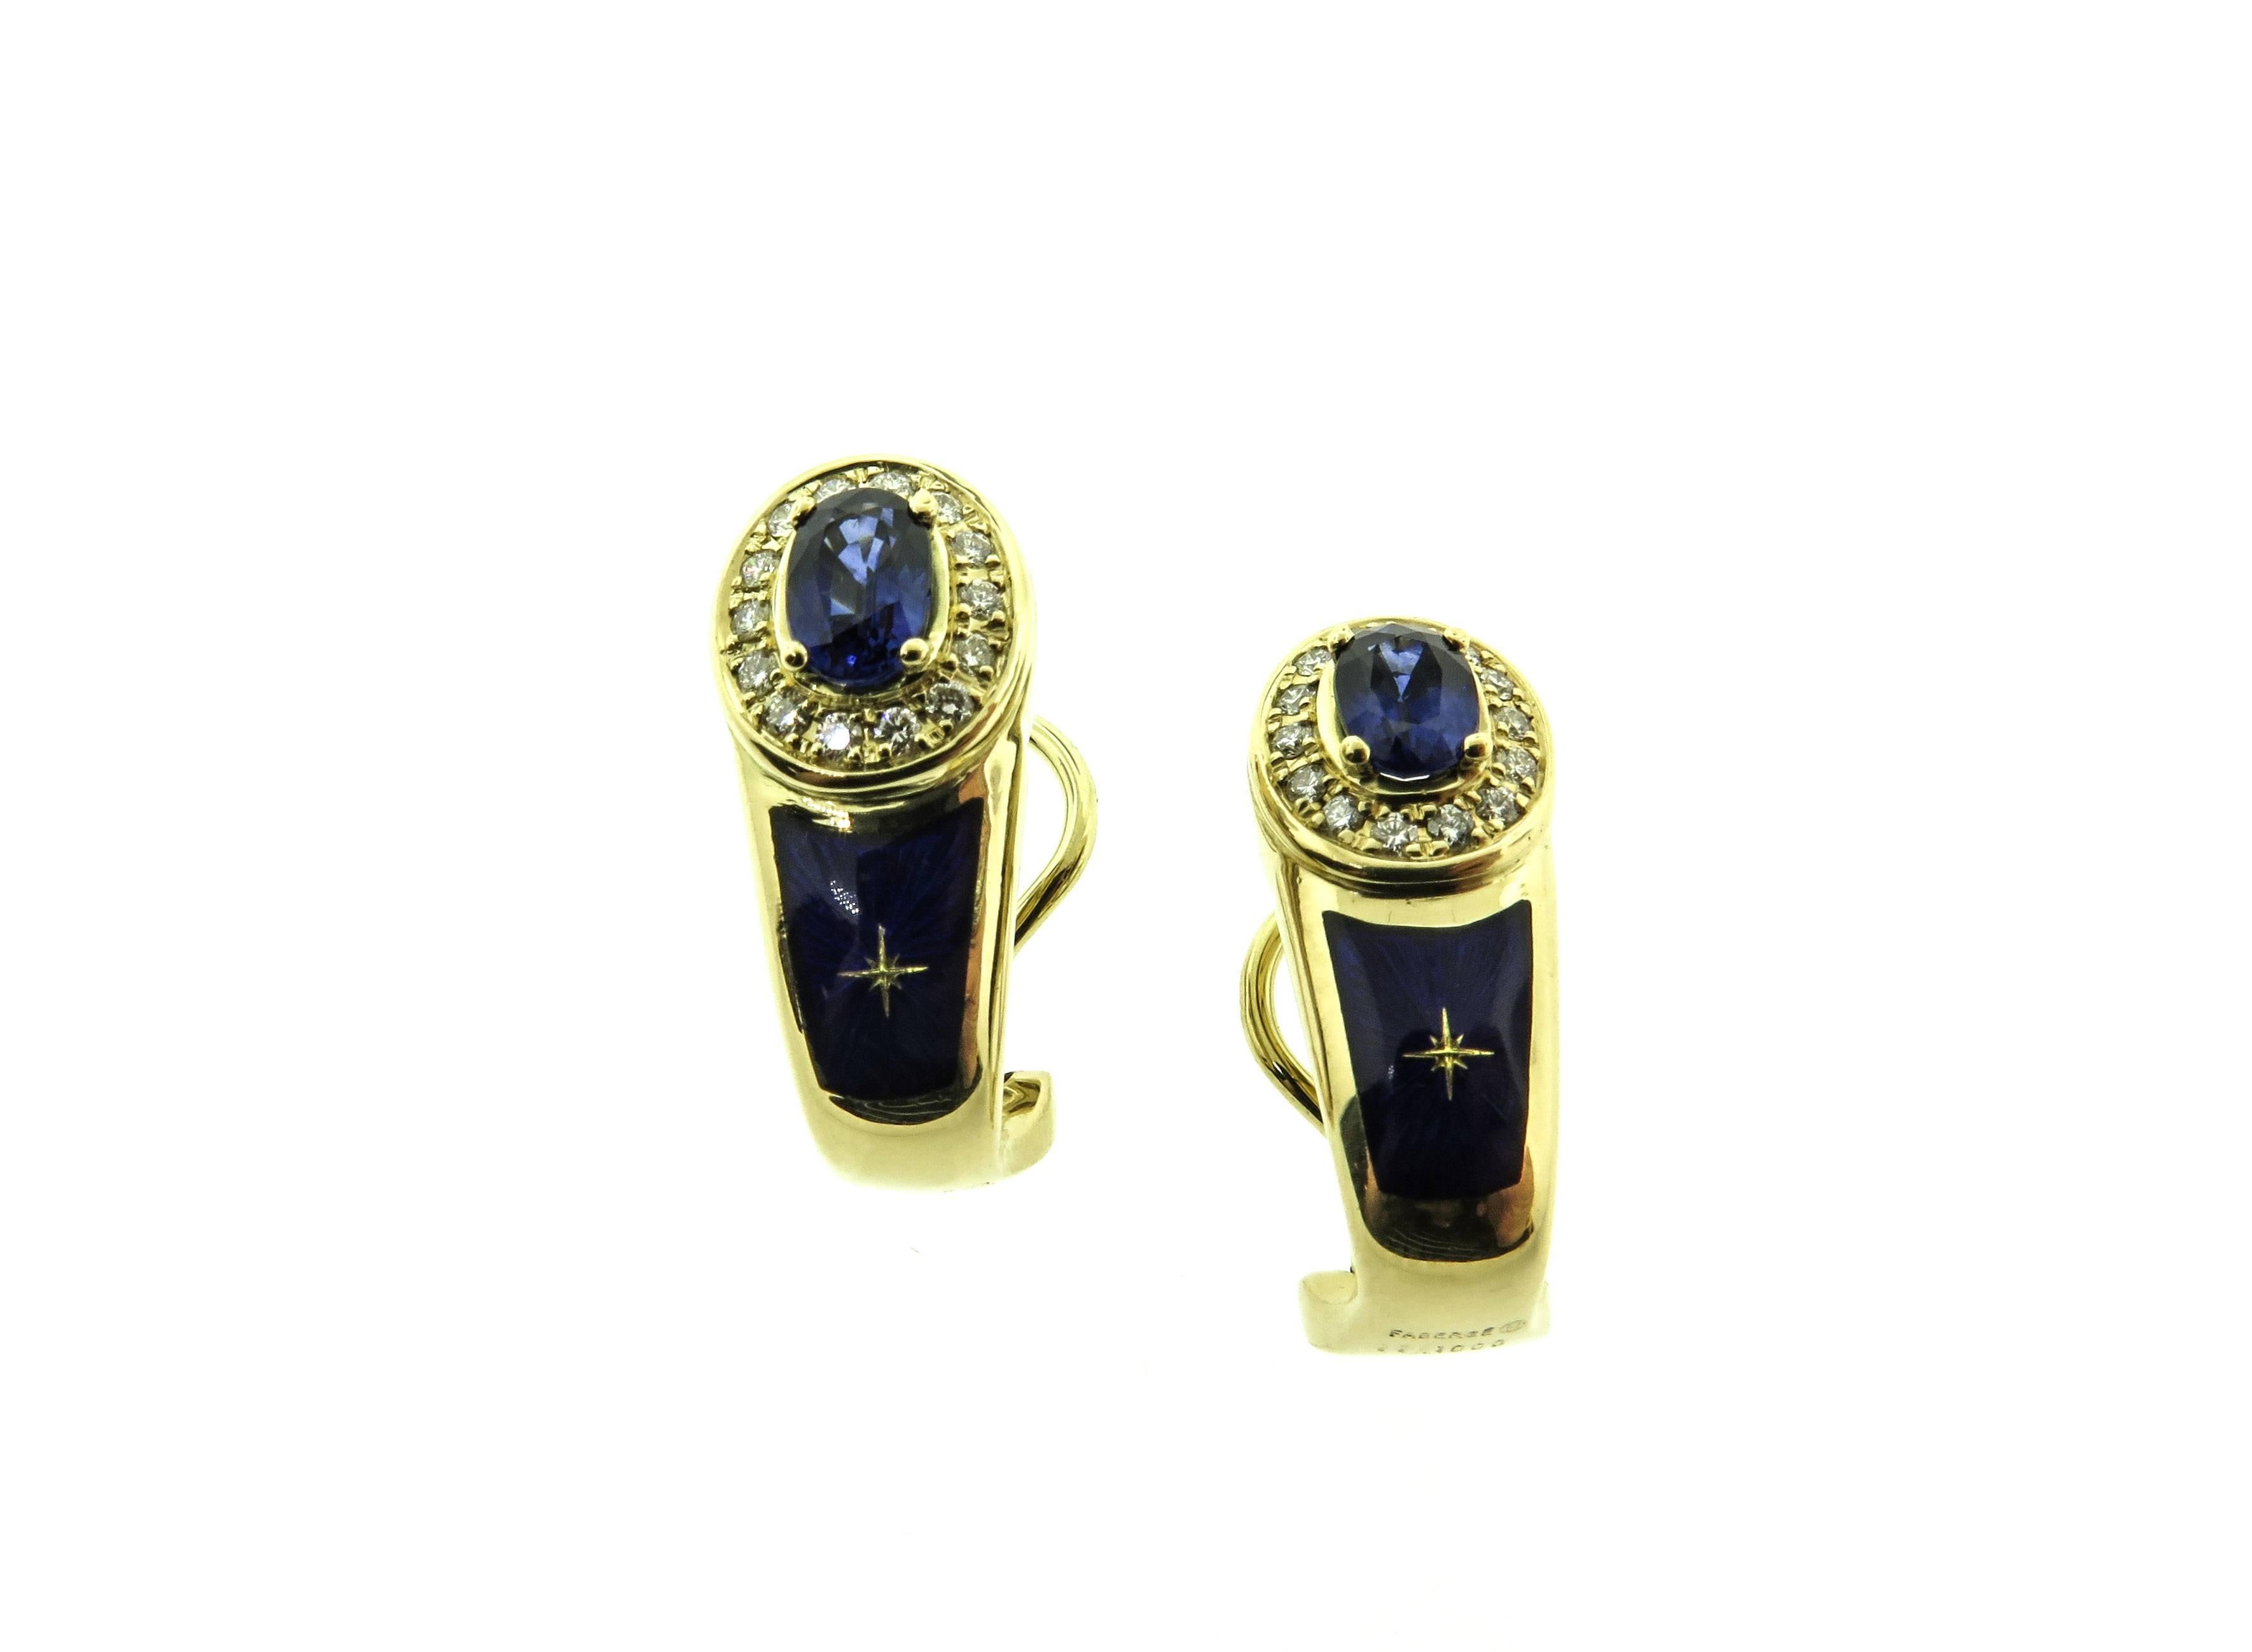 A pair of gorgeous oval blue sapphires framed by round-cut diamonds. This clip earrings with post in blue enamel and gold accents, has the amazing Faberge craftsmanship that is recognize worldwide. At the reverse is engraved with the Modern Faberge